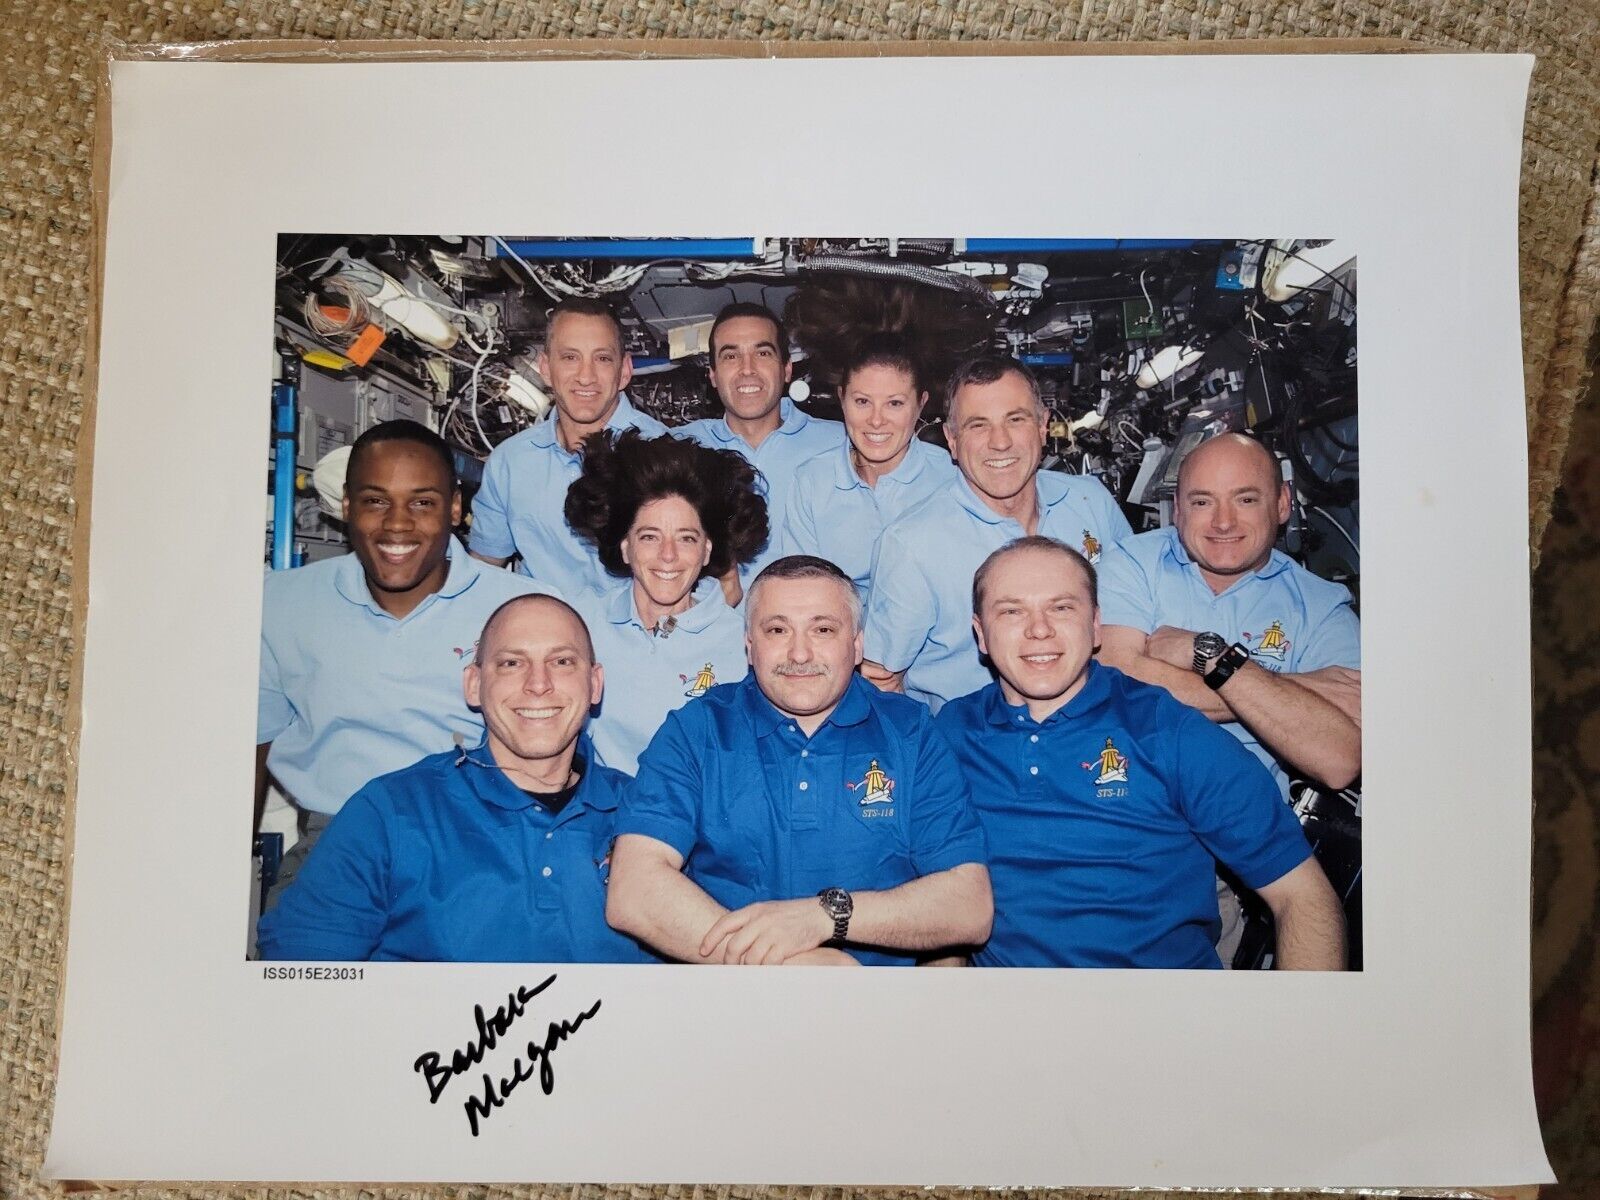 Barbara Morgan SIGNED 8X10 NASA Women ASTRONAUT WITH STS-118 & ISS - 13A CREWS